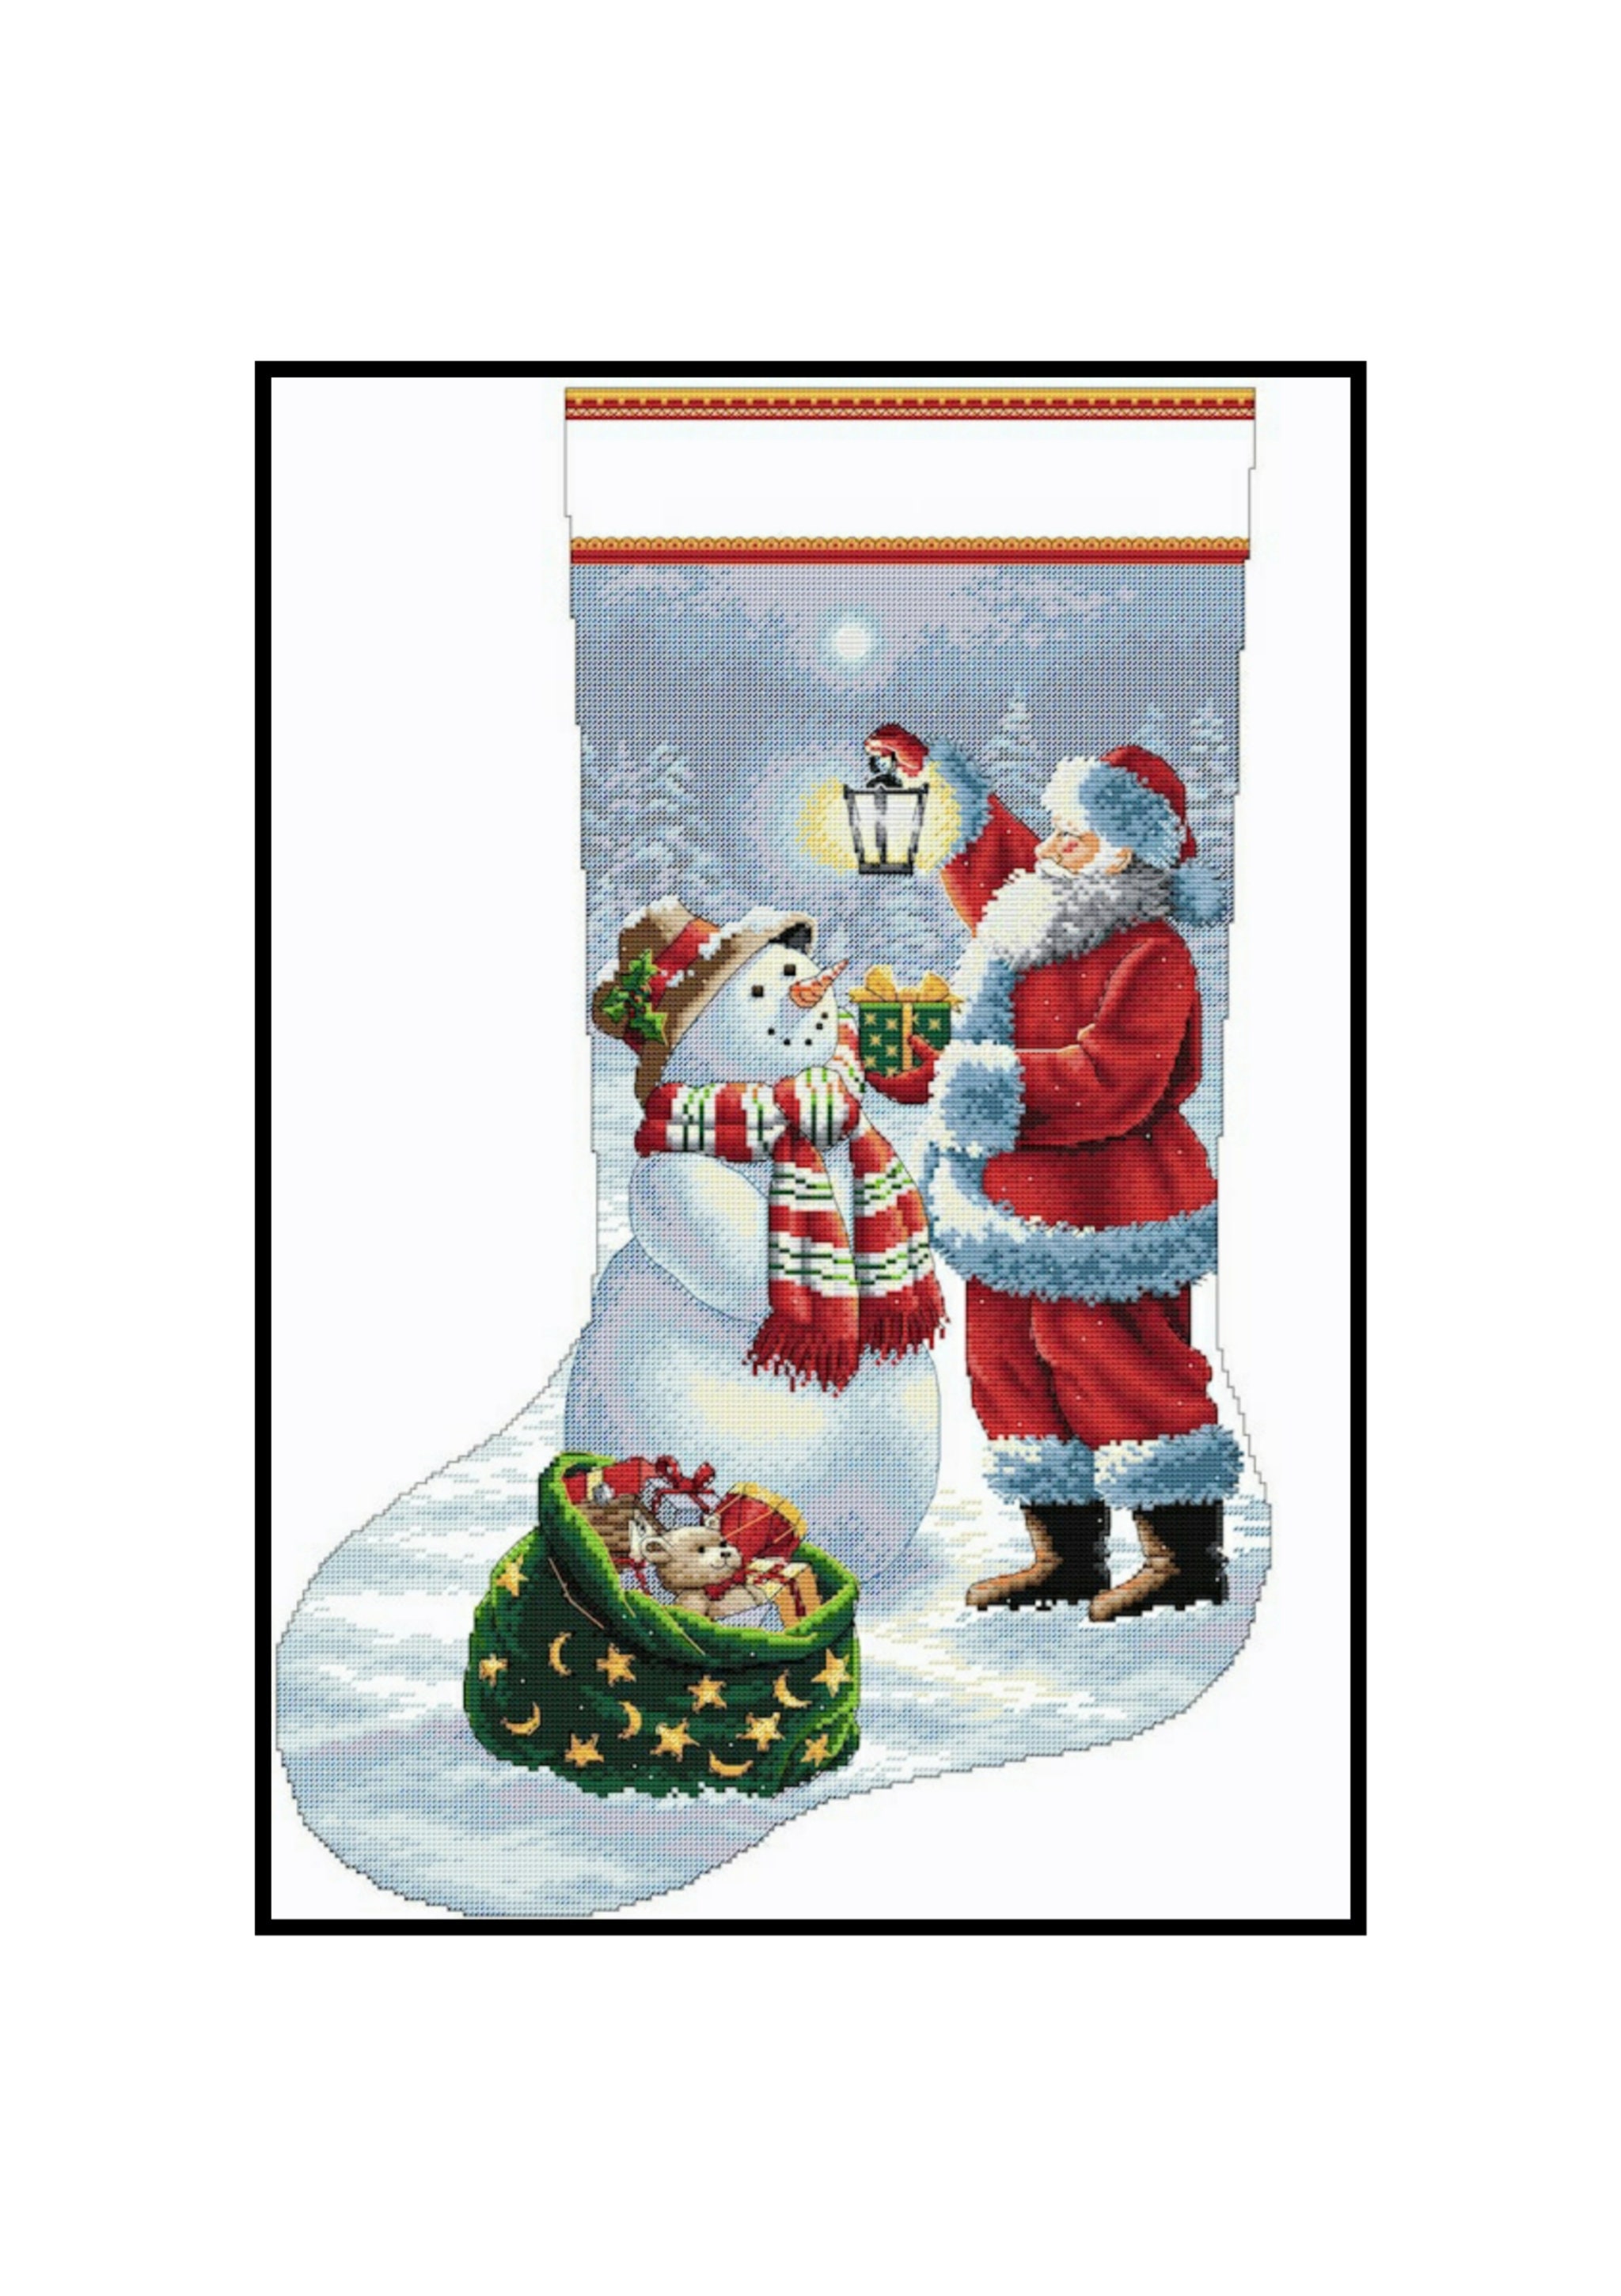 Original Design Needlepoint Christmas Stockings Delivery Date 2026